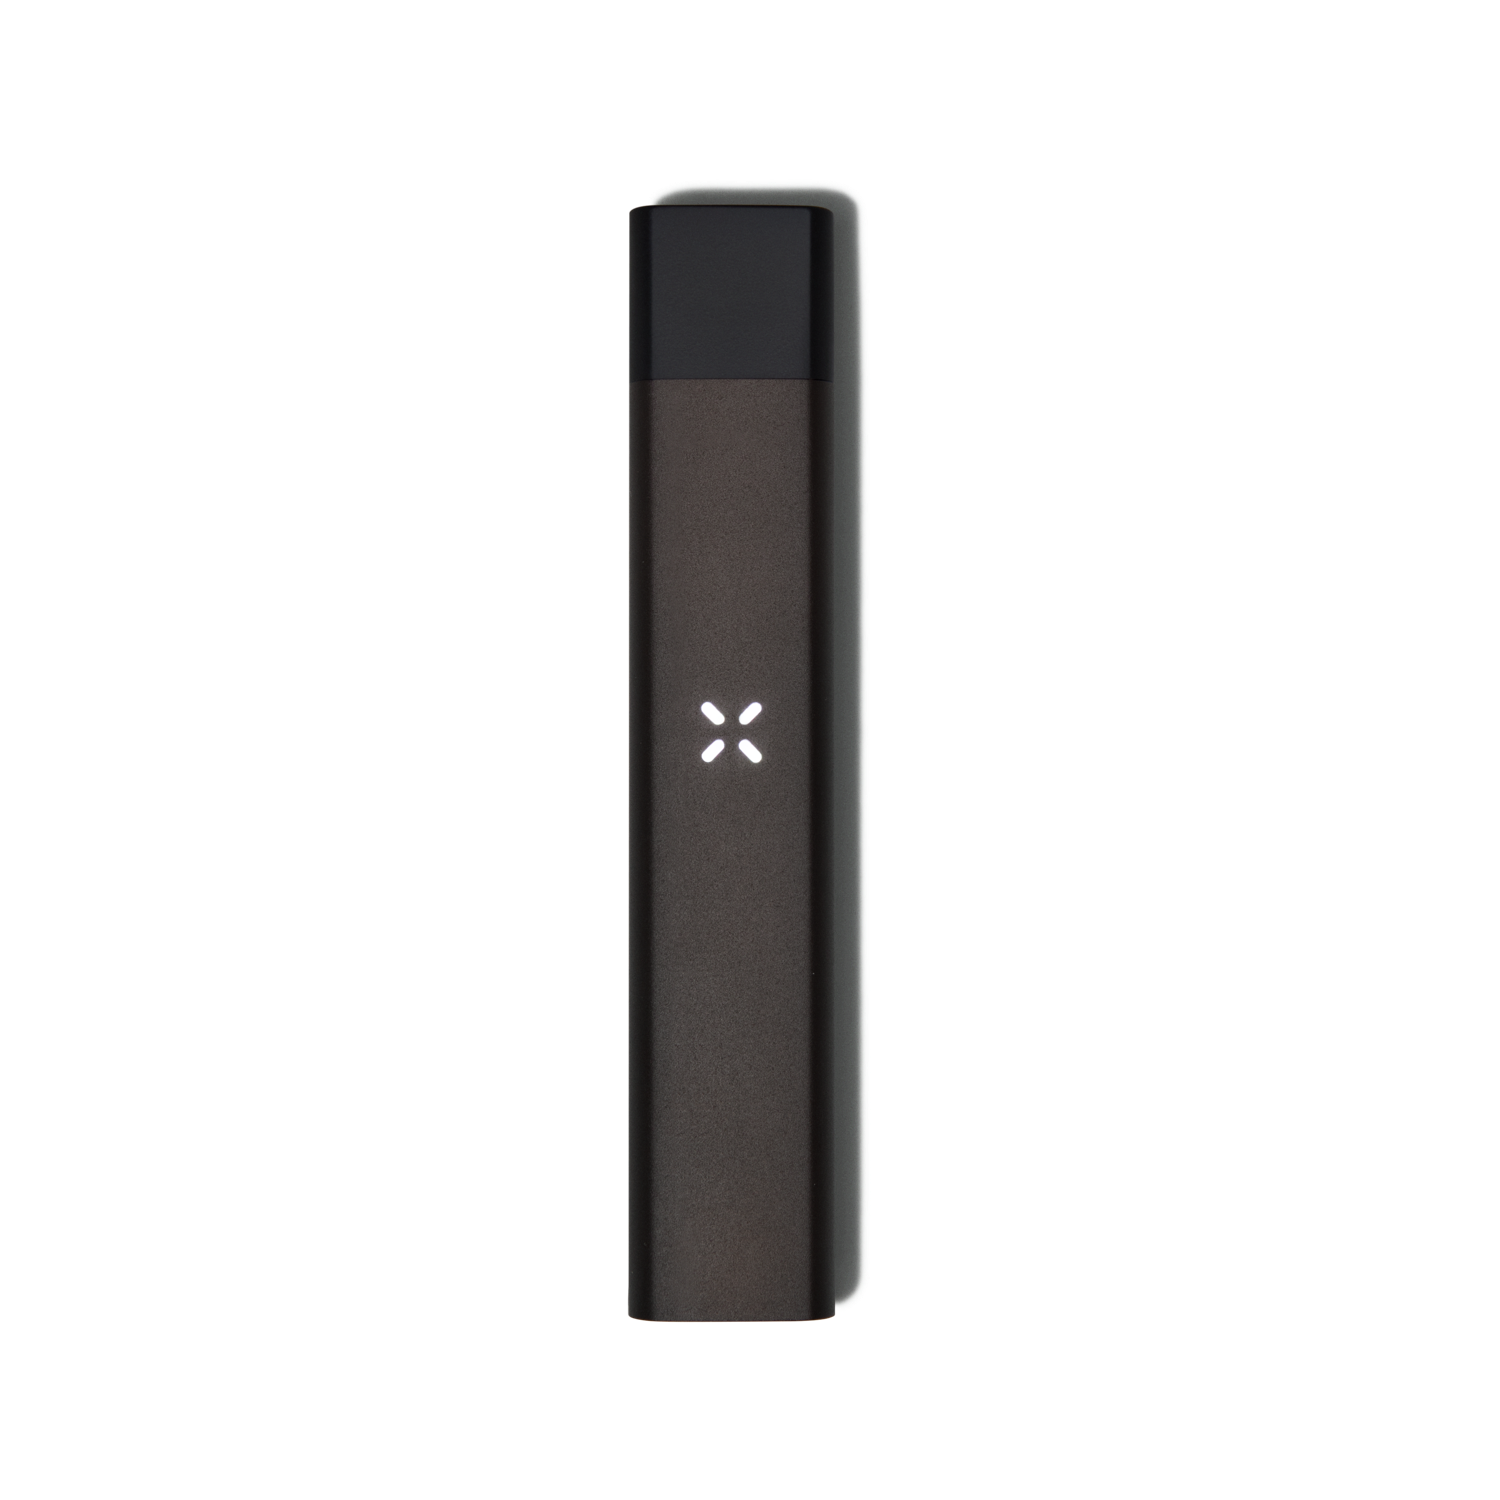 PAX Era Extract Vaporizer - compatible with all PAX Era pods!